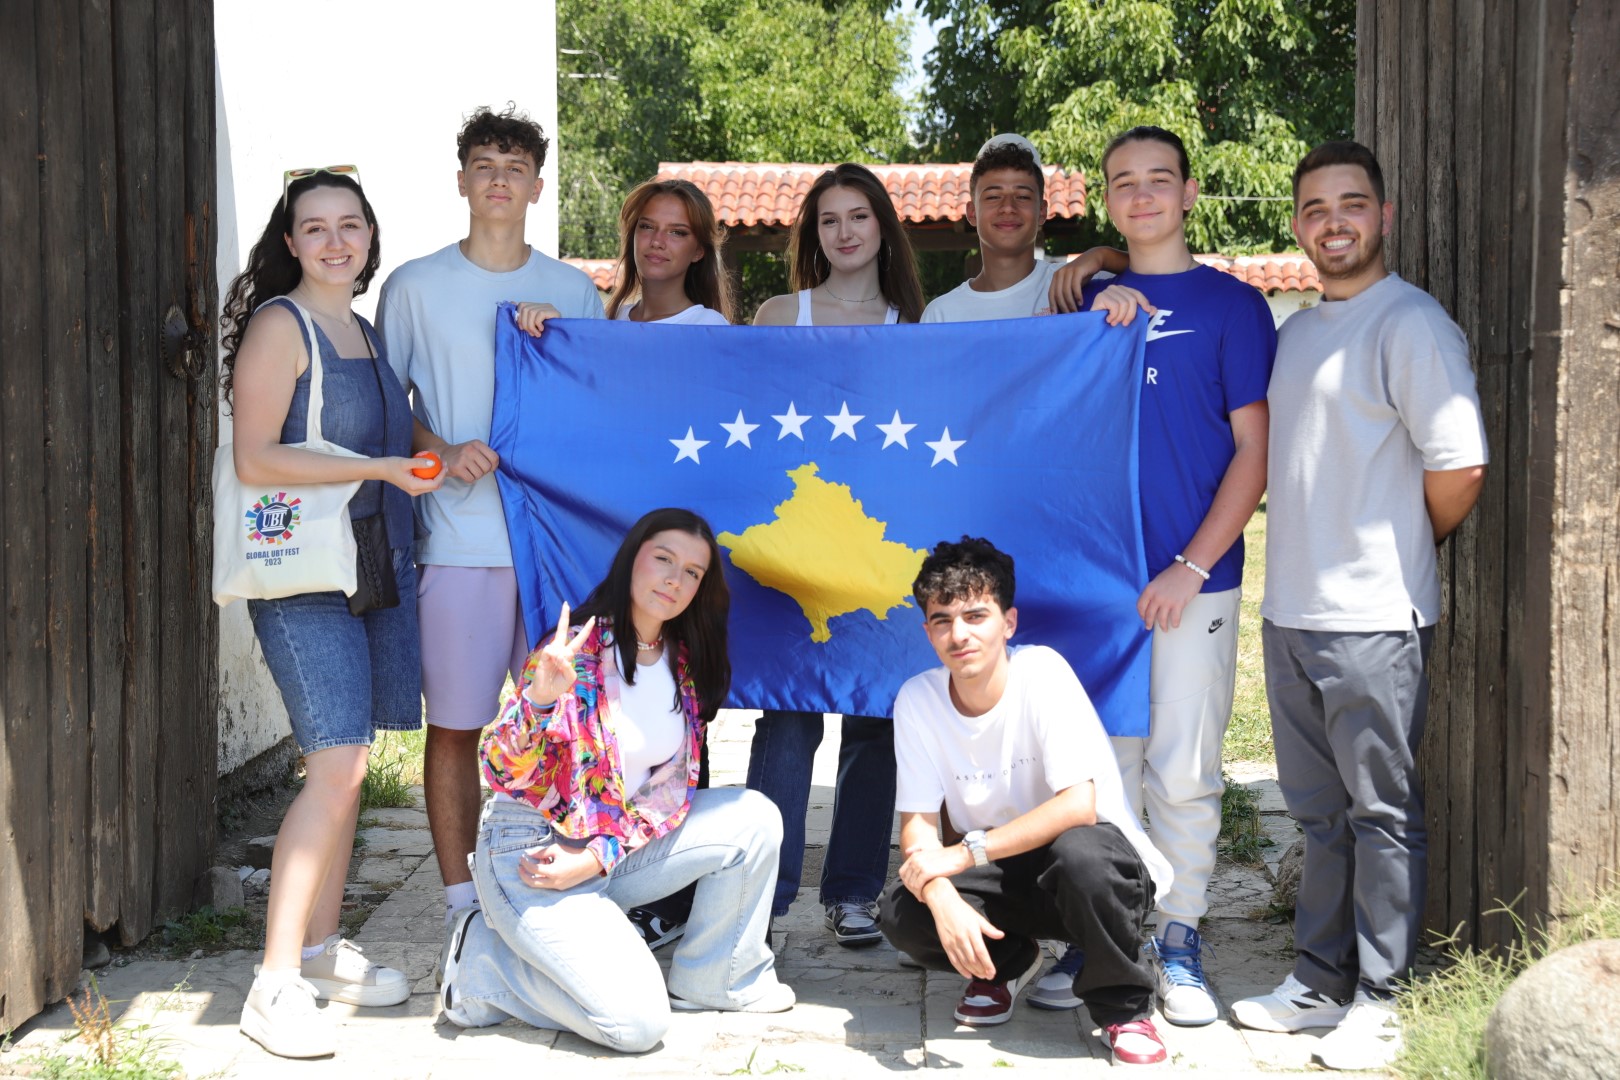 The Kosovo team is getting ready for the international robotics competition in Singapore